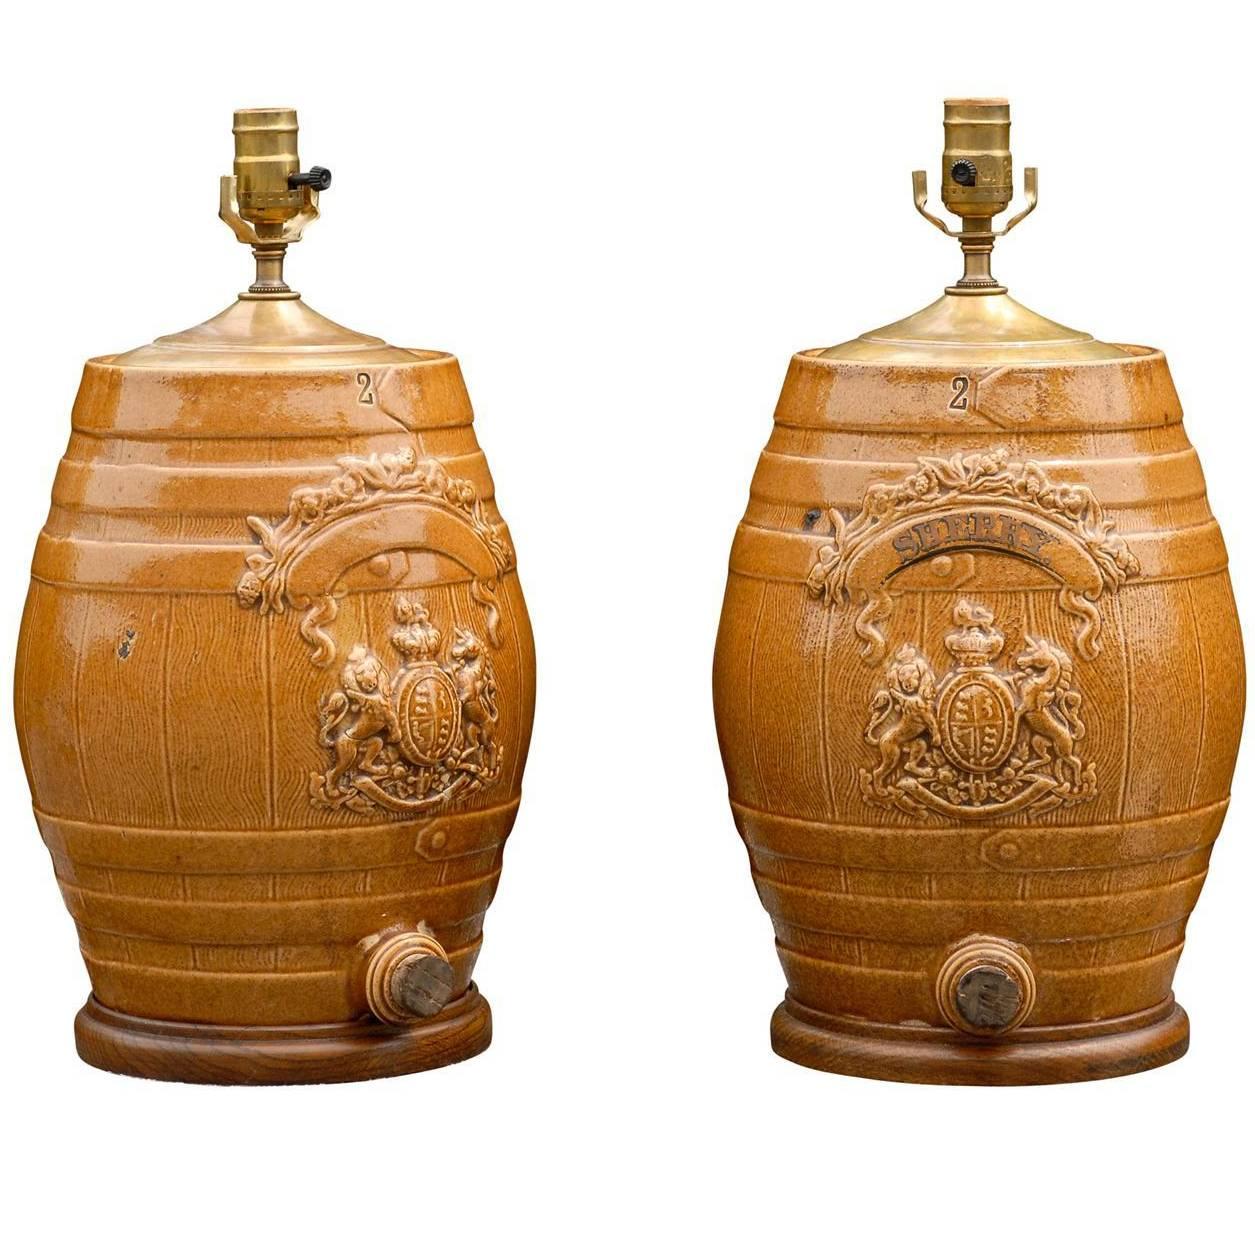 Pair of English Stoneware Spirit Barrel Lamps from the Mid-19th Century